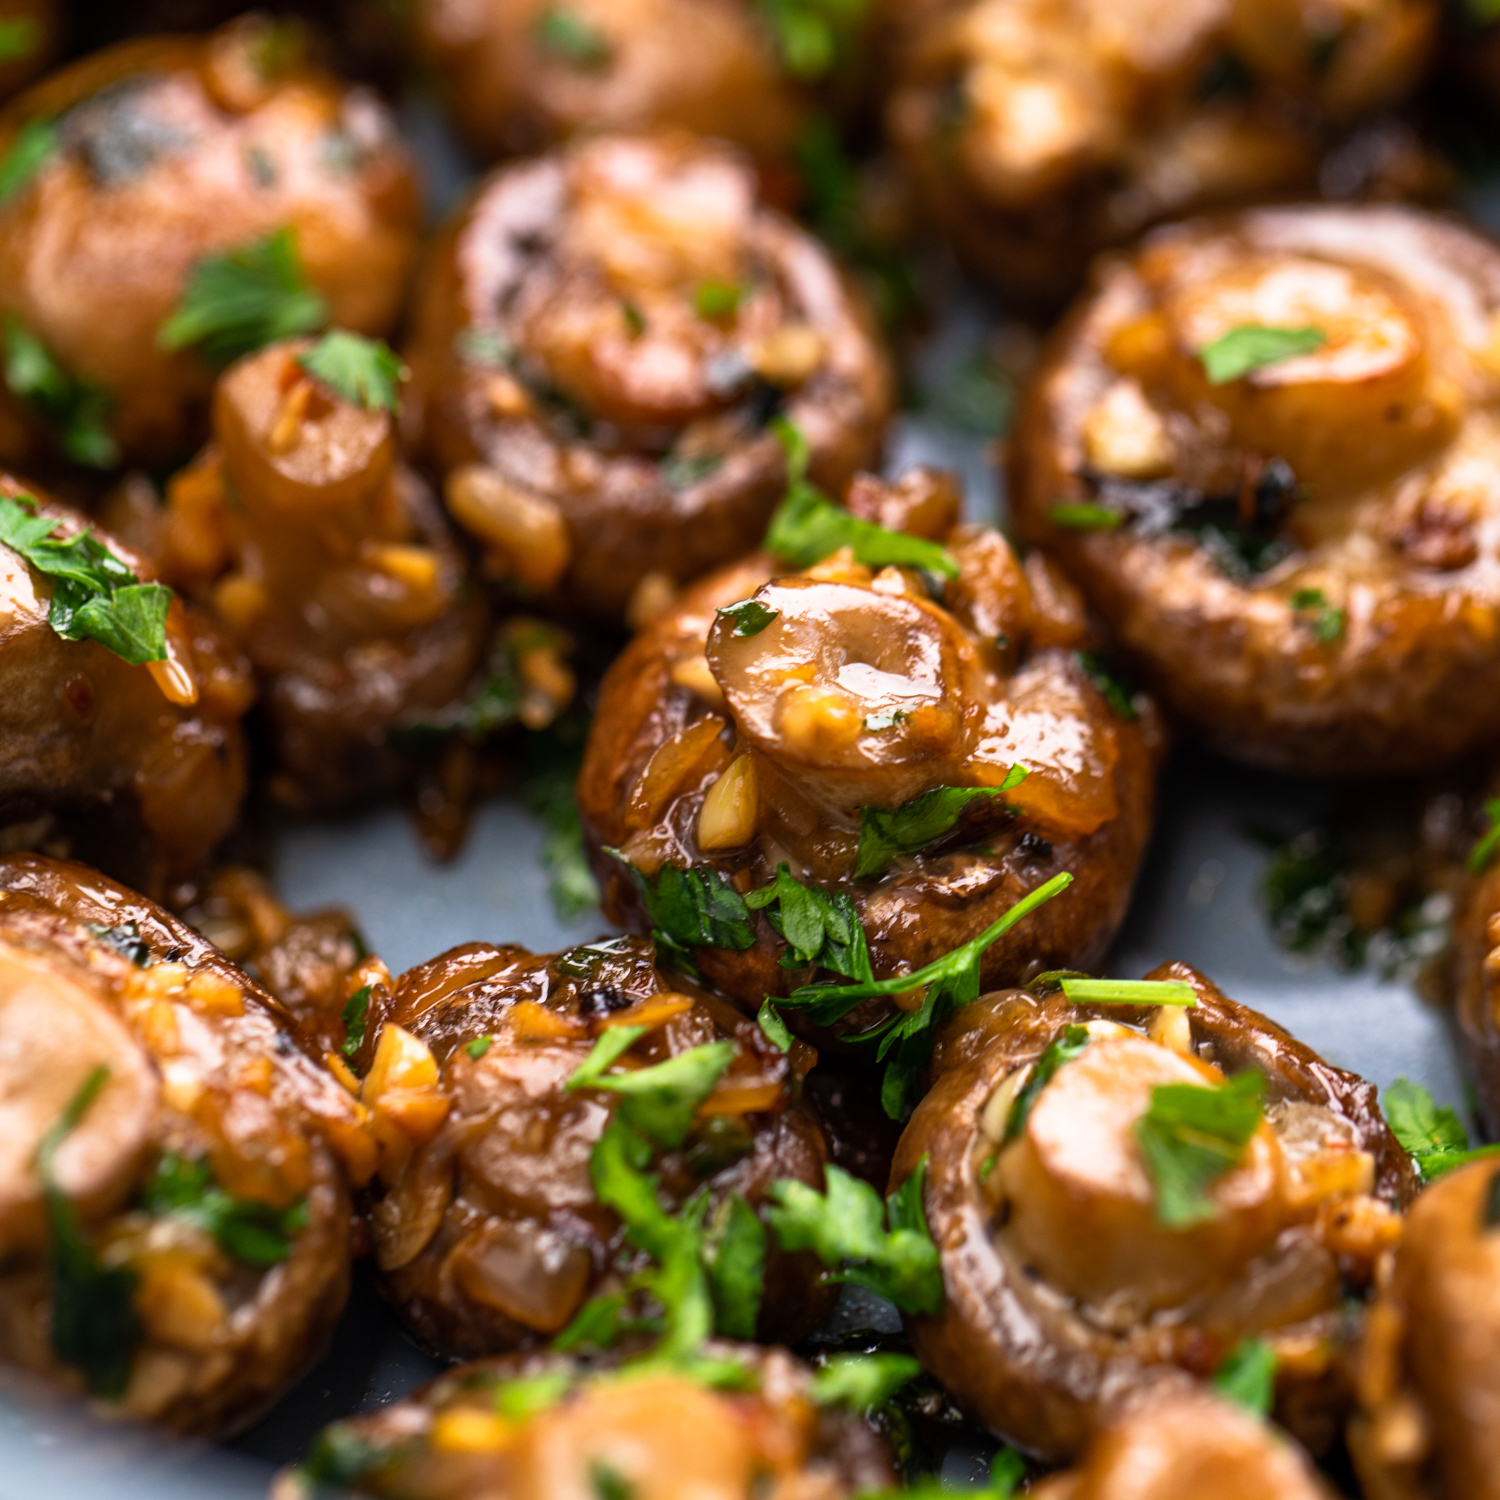 Mushrooms cooked in garlic and butter and garnished with parsley.